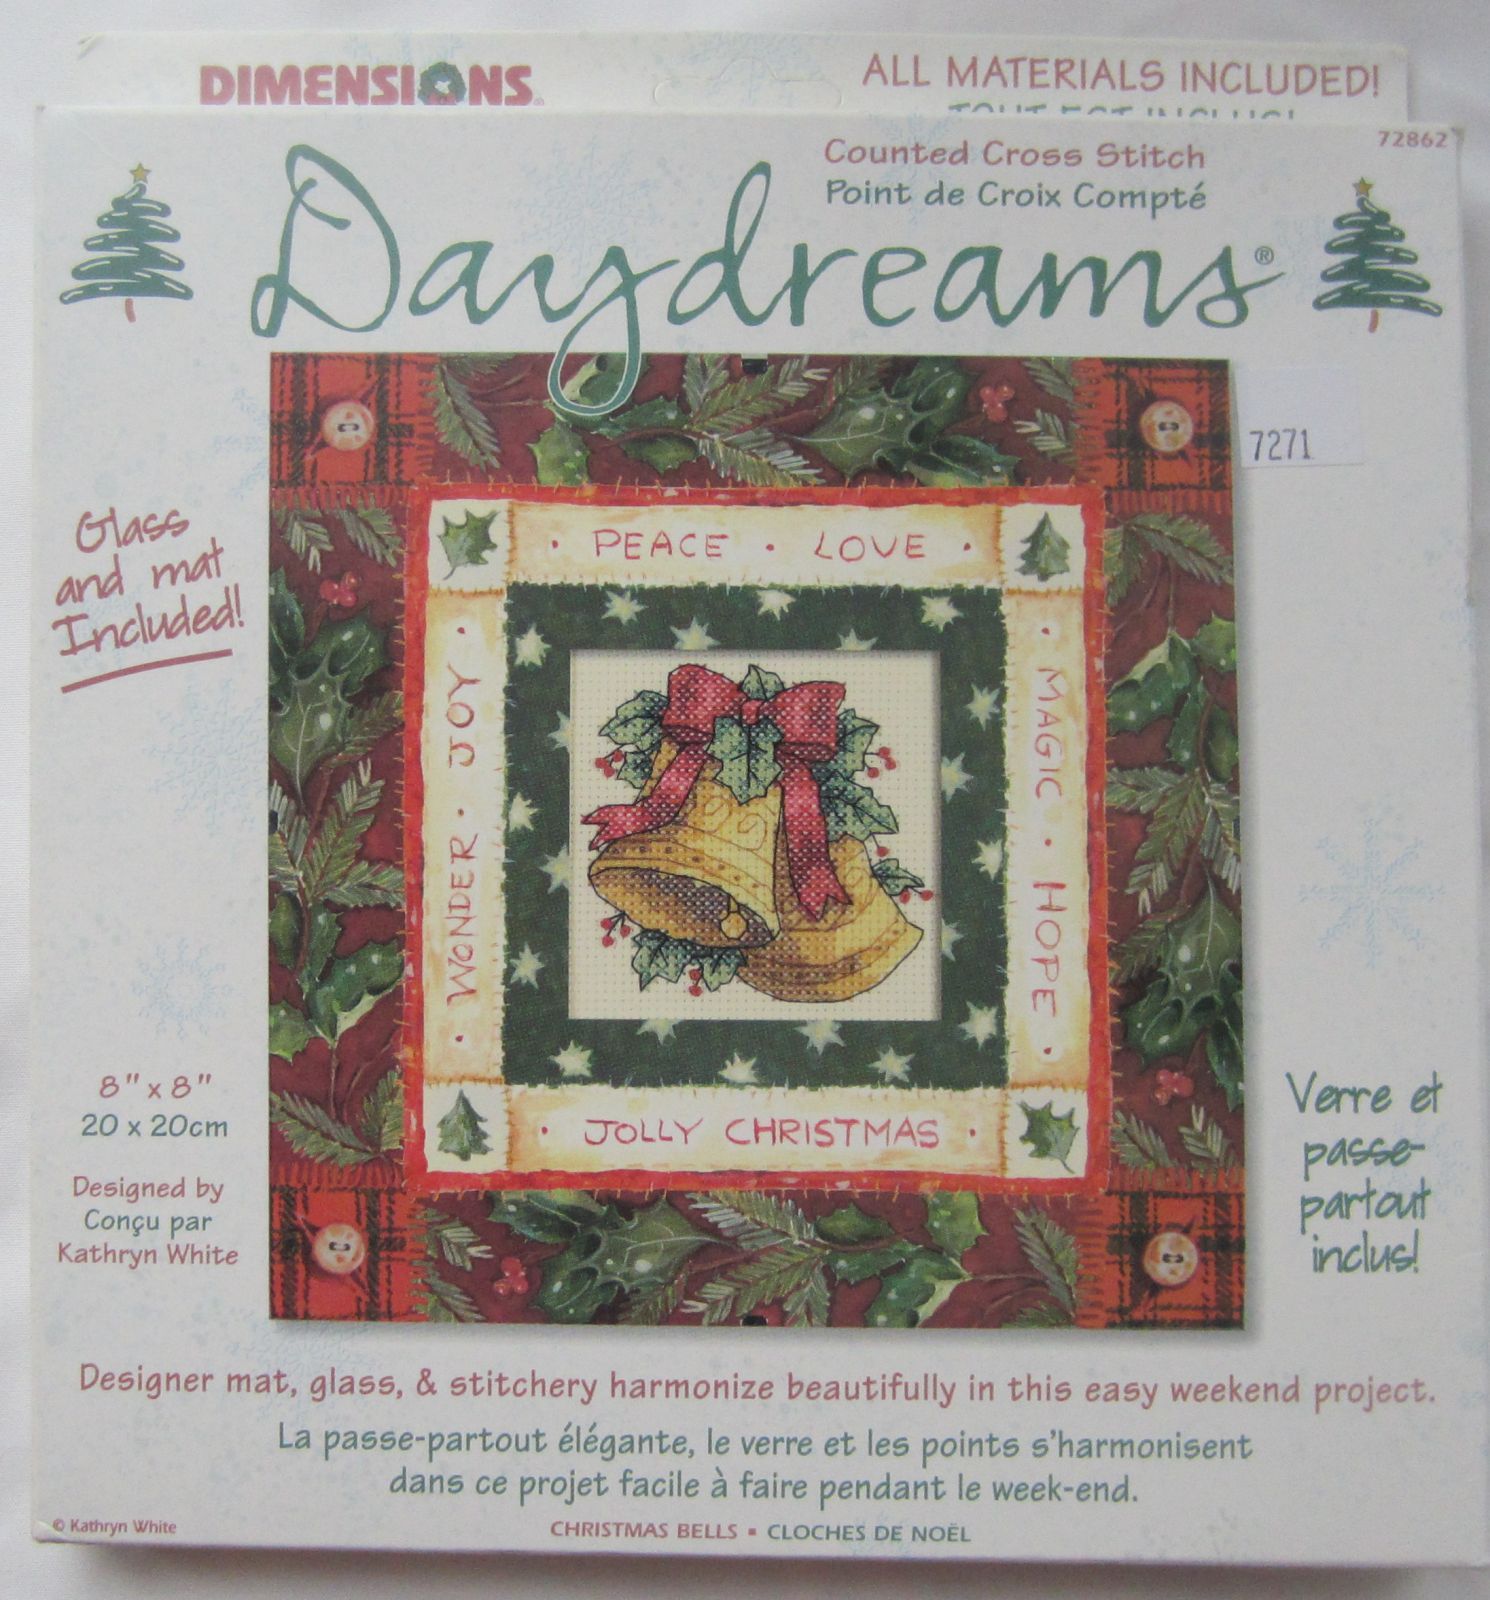 Dimensions Counted Cross Stitch Daydreams Christmas Bells Kit 8" x 8" - $15.99